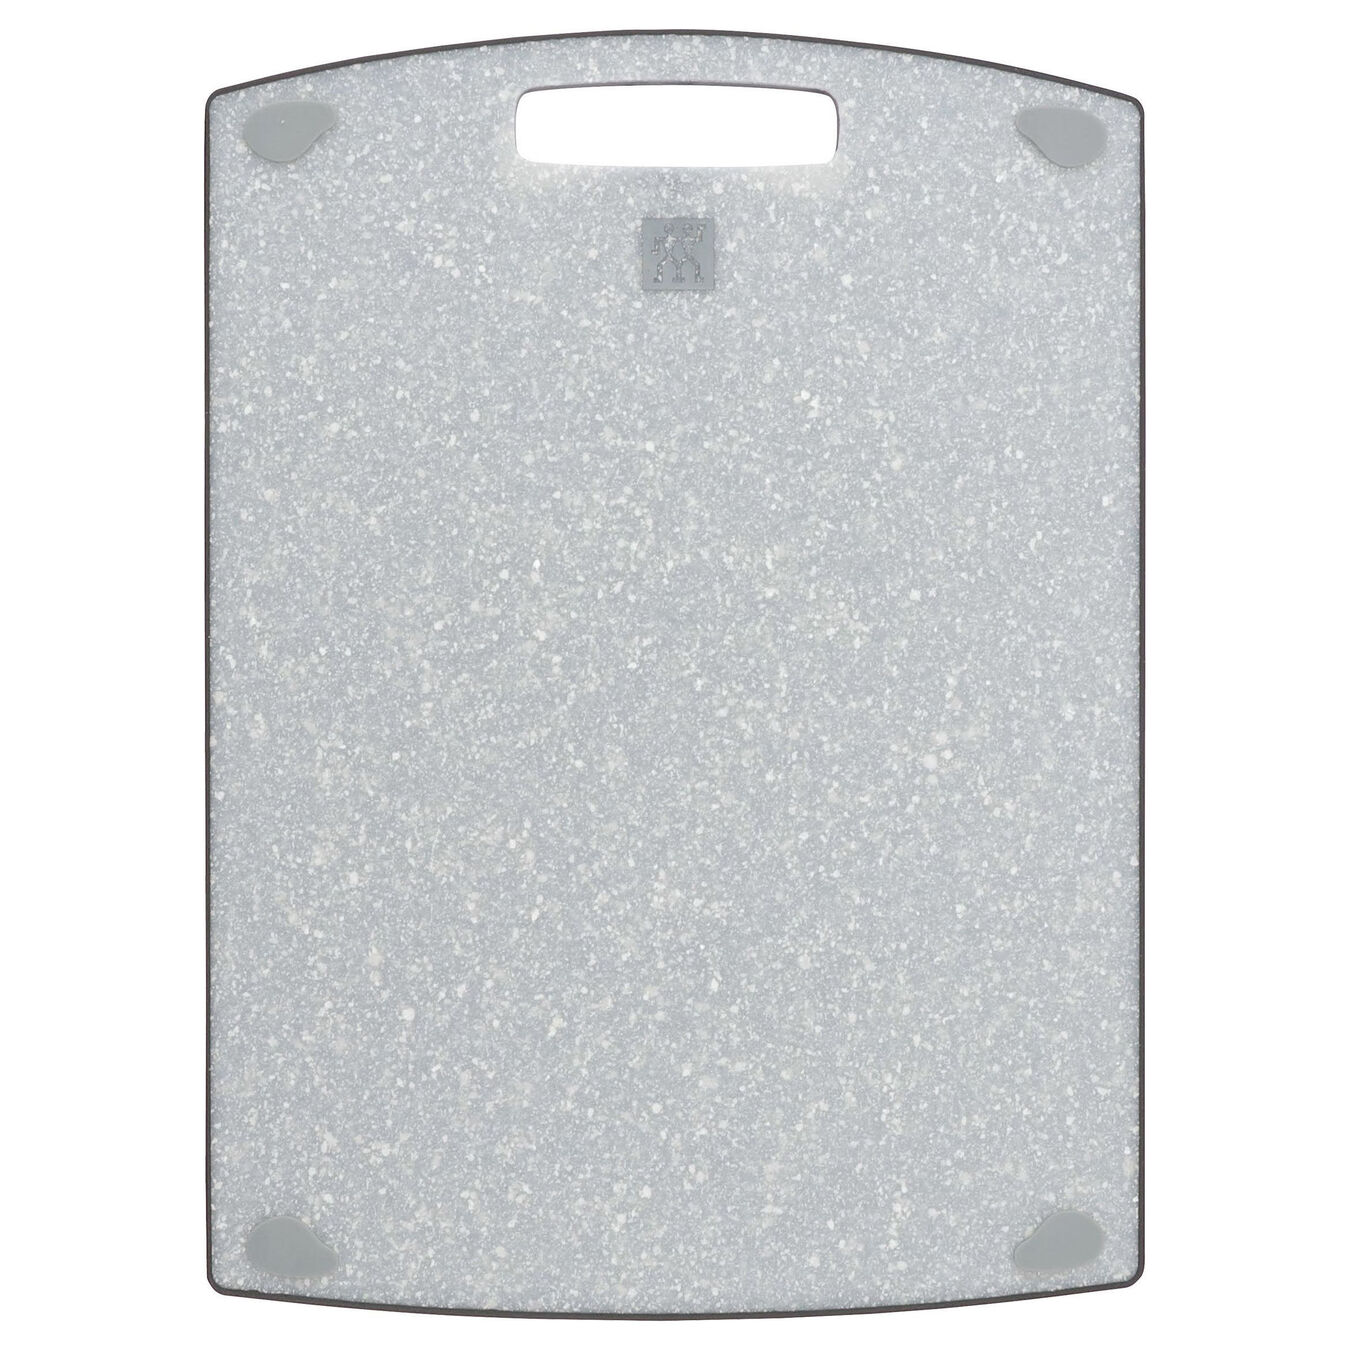 MARBLE SPECKLED BOARD SET 2 Piece, plastic,,large 6